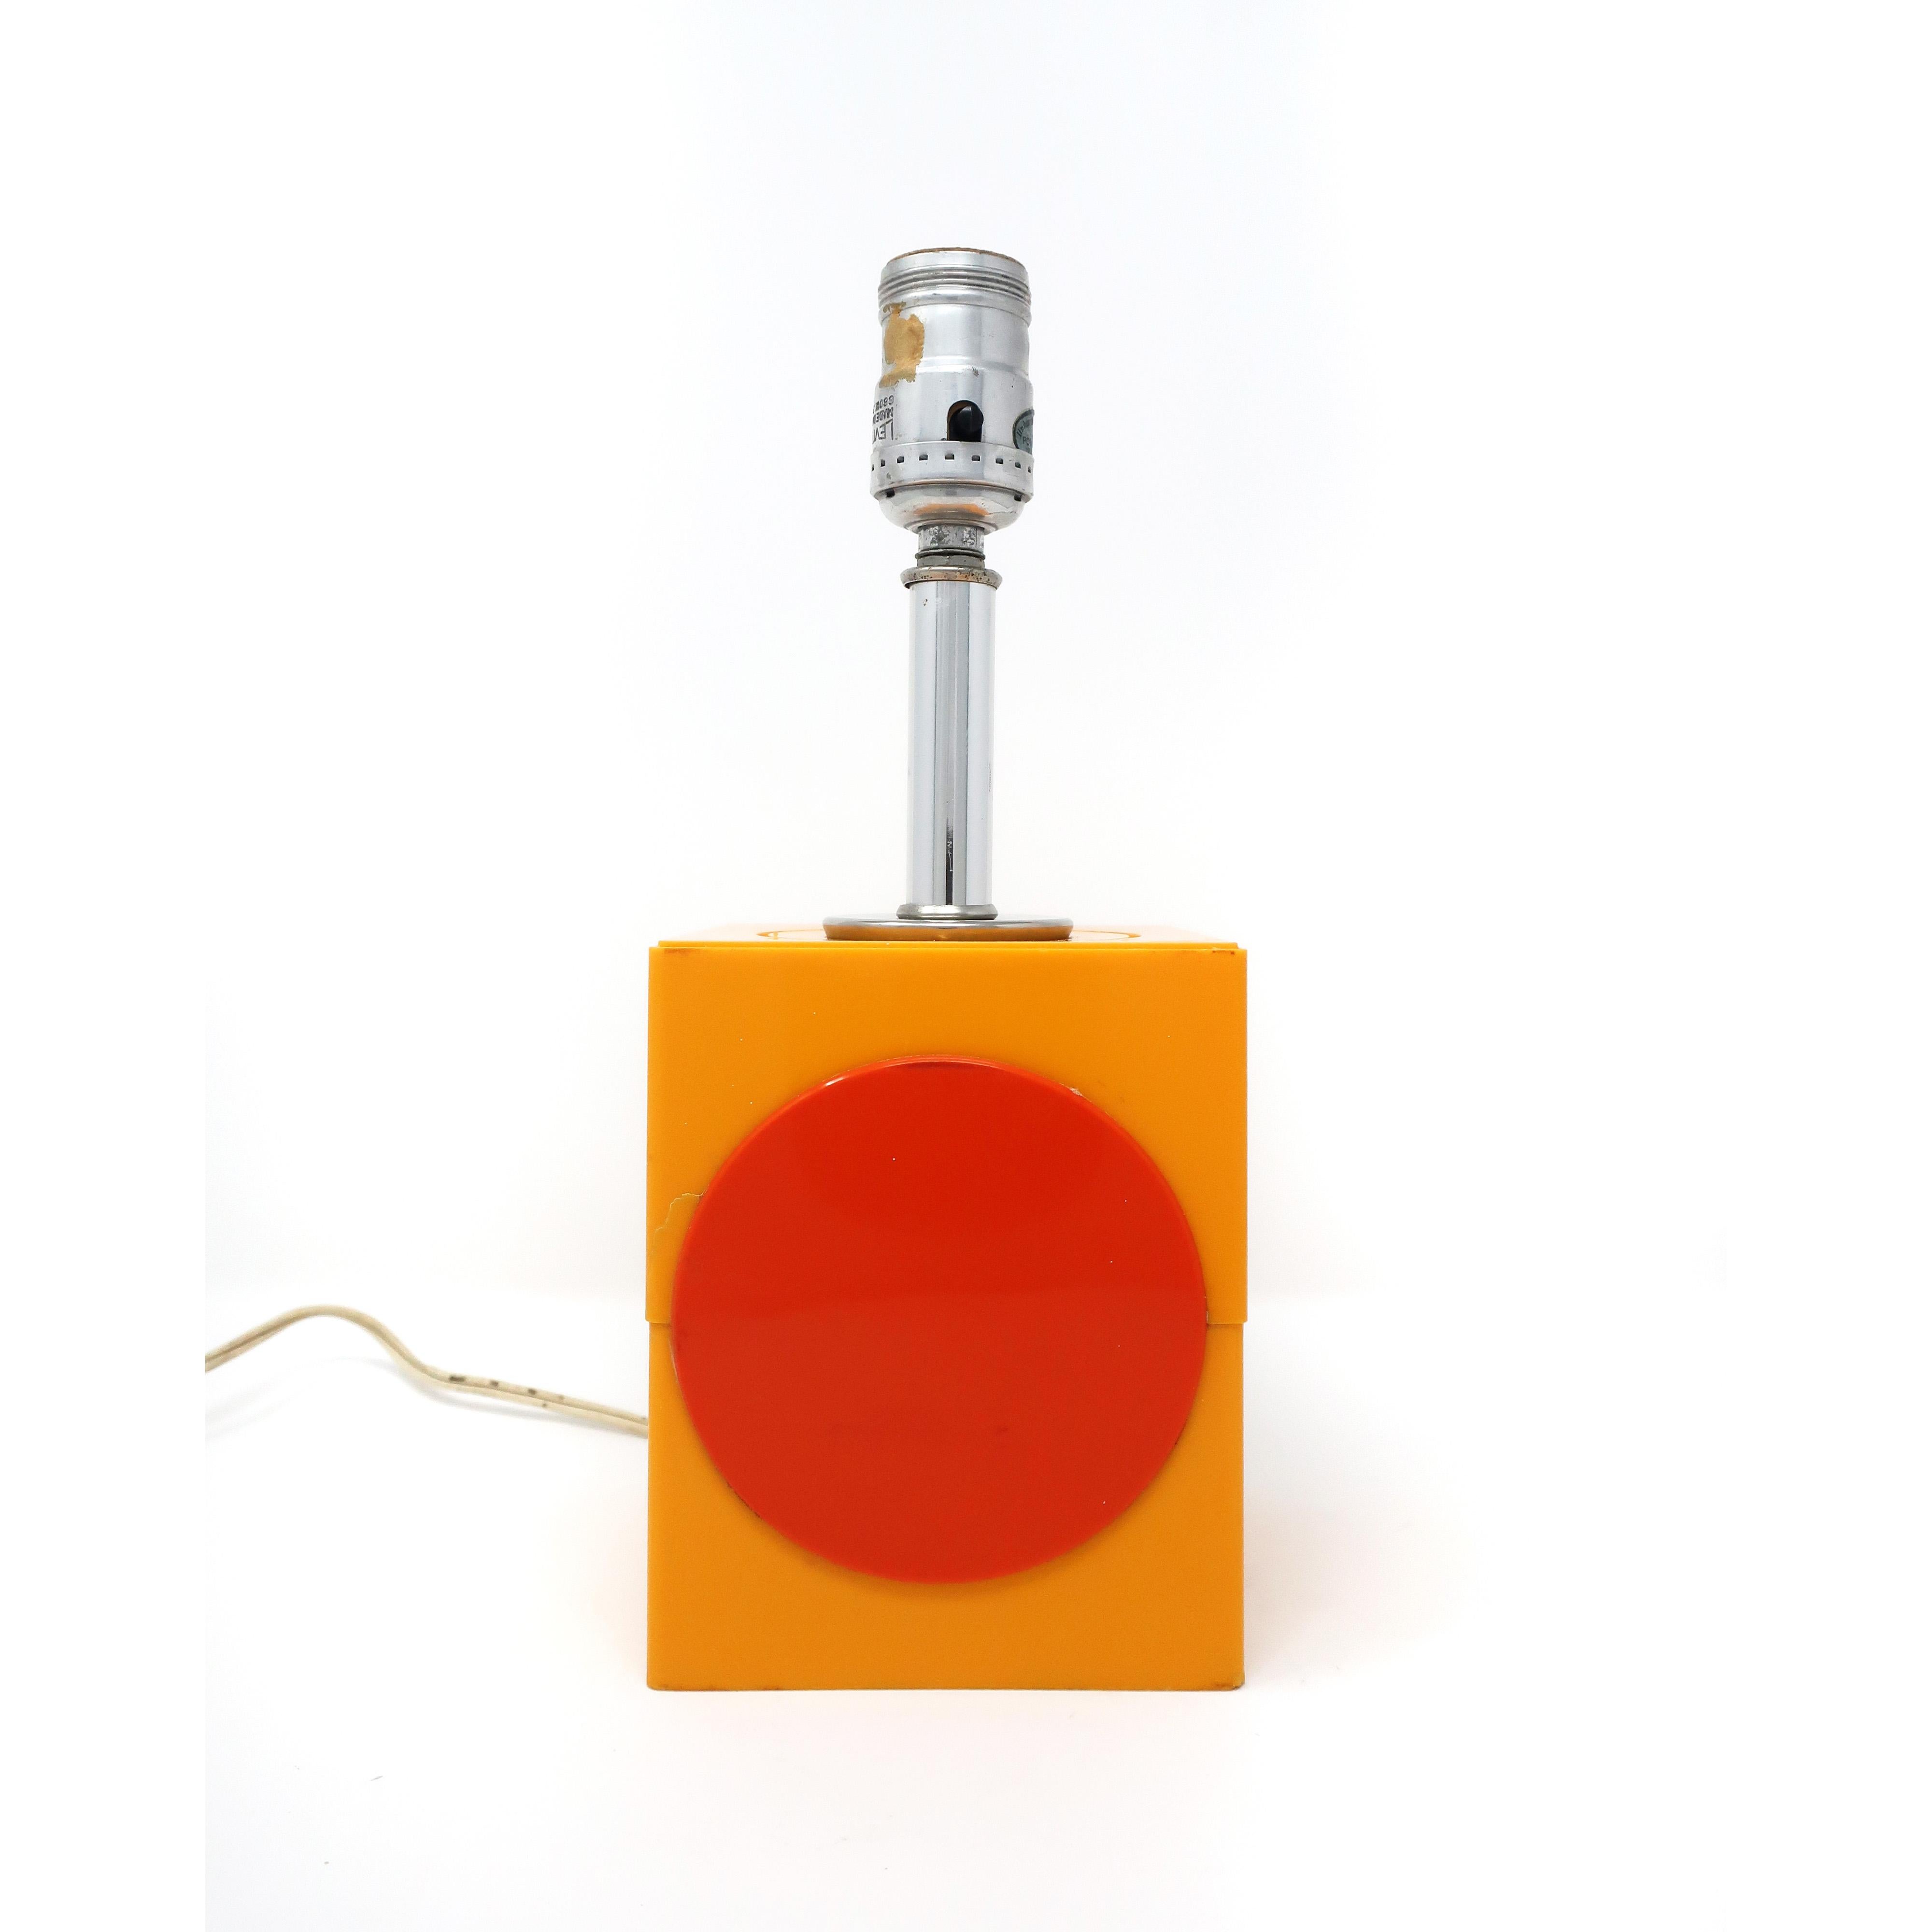 A Mid-Century Modern orange table lamp with red accent and chrome stem. Perfect in an entry way, on a bedside table, or as a desk lamp. Will look great with a frosted globe bulb or a clip on lamp shade. 

In good vintage condition with signs of